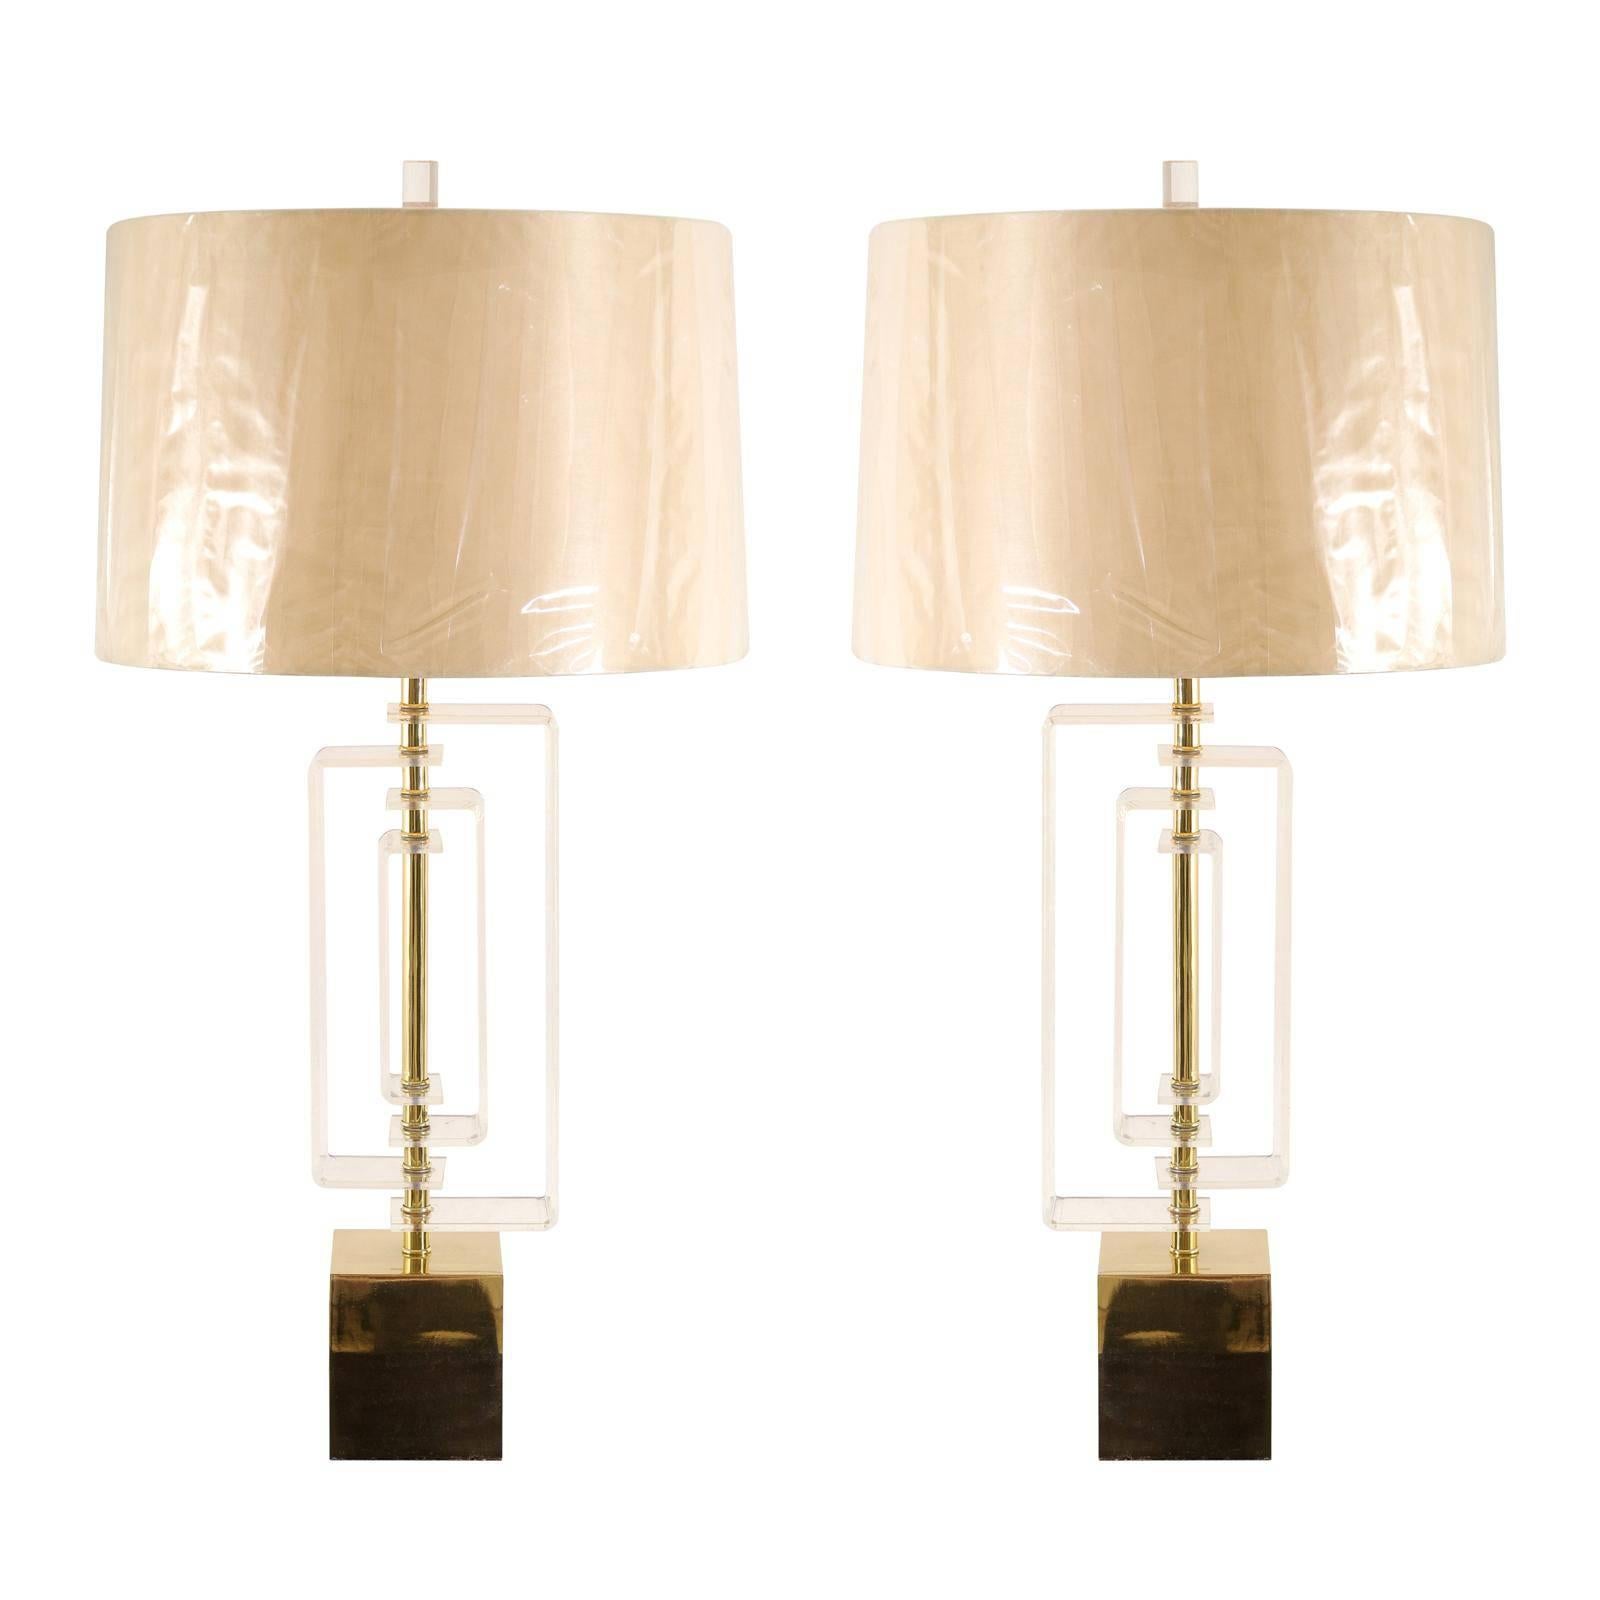 Restored Pair of Vintage Lucite and Brass Lamps by Laurel